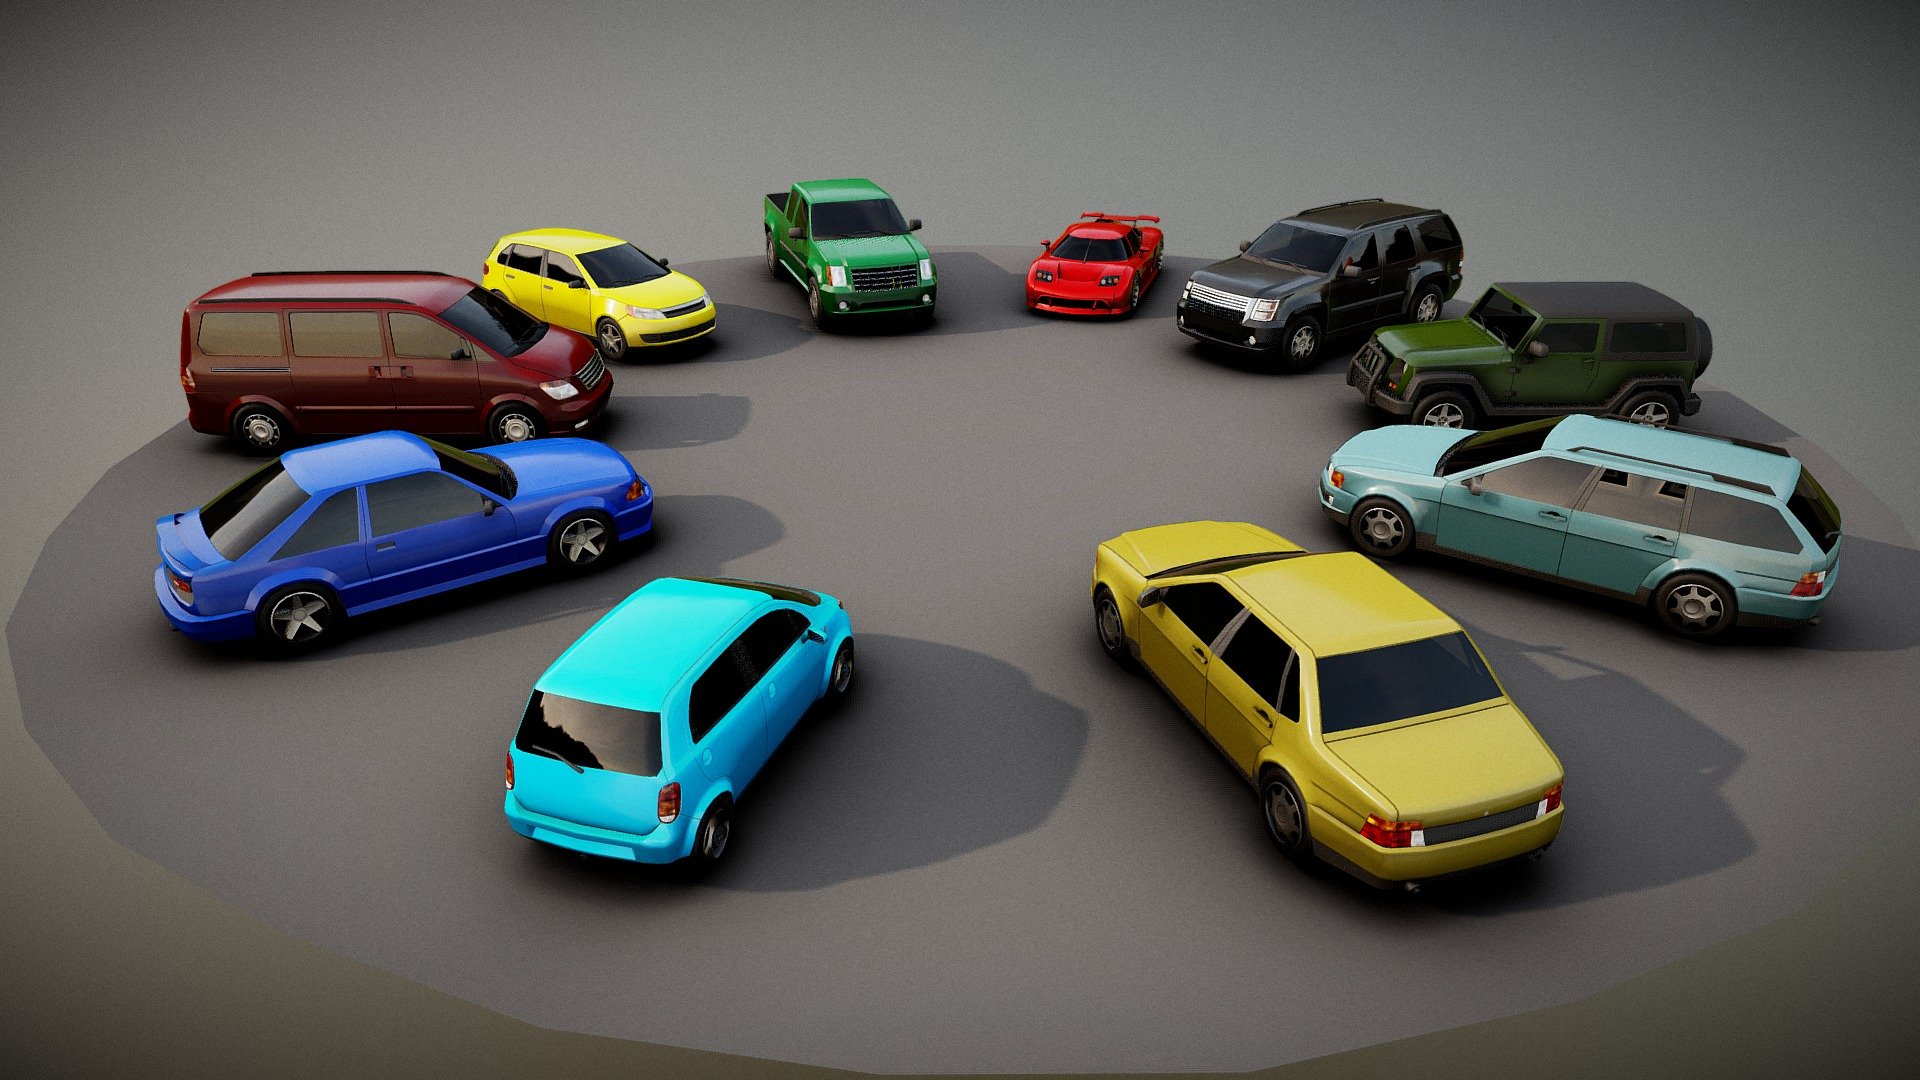 Low-poly (under 8k) pack of generic passenger vehicles.

Suitable for exterior landscape renderings and can be used in gamedev as props or in mobile games as player vehicle.

All cars are bearing minimum to none similarities to real life cars and completly  trademark clame proof.

Specs are:
sedan - 7122 tris.
wagon - 6982 tris.
hatchback - 6808 tris.
compact - 7257 tris.
coupe - 6022 tris.
minivan - 7450 tris.
sport - 6268 tris.
pickup - 6918 tris.
SUV - 7951 tris.
offroad - 6502 tris. 

Each car has 6 different colors texture, metallic, glossiness and opacity, also, they can be rendered without textures at all using only material color or vertex paint.

For the best picture, please, switch viewer to HD texture 3d model